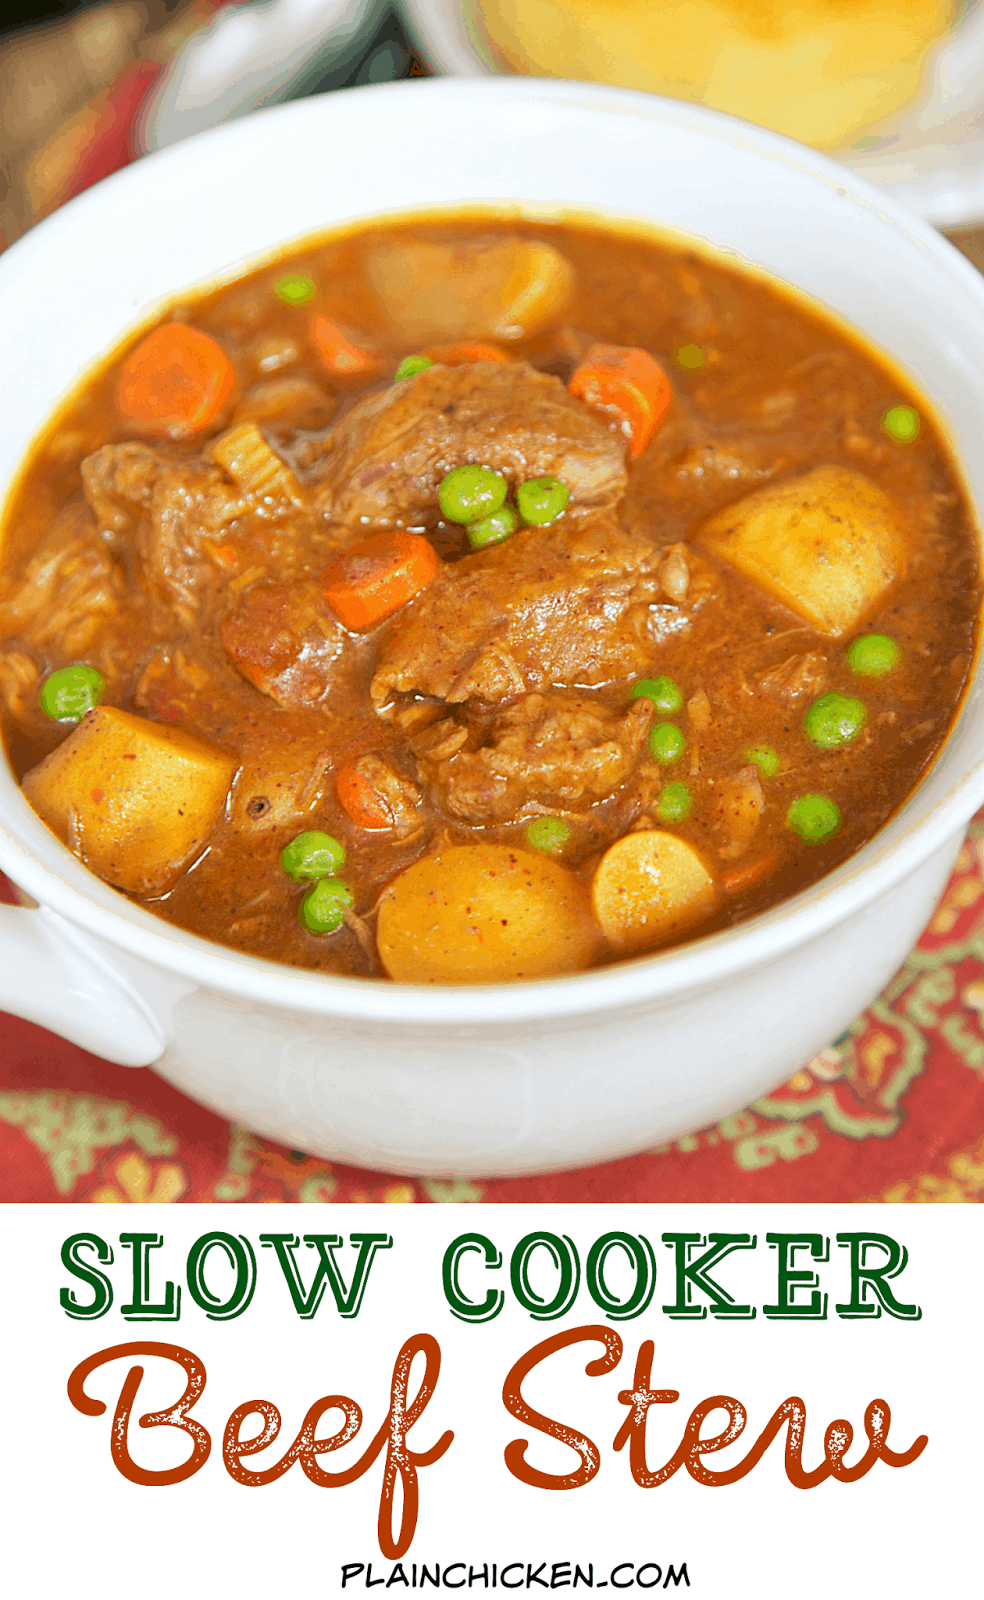 Slow Cooker Beef Stew - beef, potatoes, carrots, green peas, tomatoes, celery, chili powder, brown gravy mix, beef broth. Comfort food at its best! So easy and SO good. Everyone gobbled this up - even the kids!! Serve with some biscuits or cornbread for a complete meal!